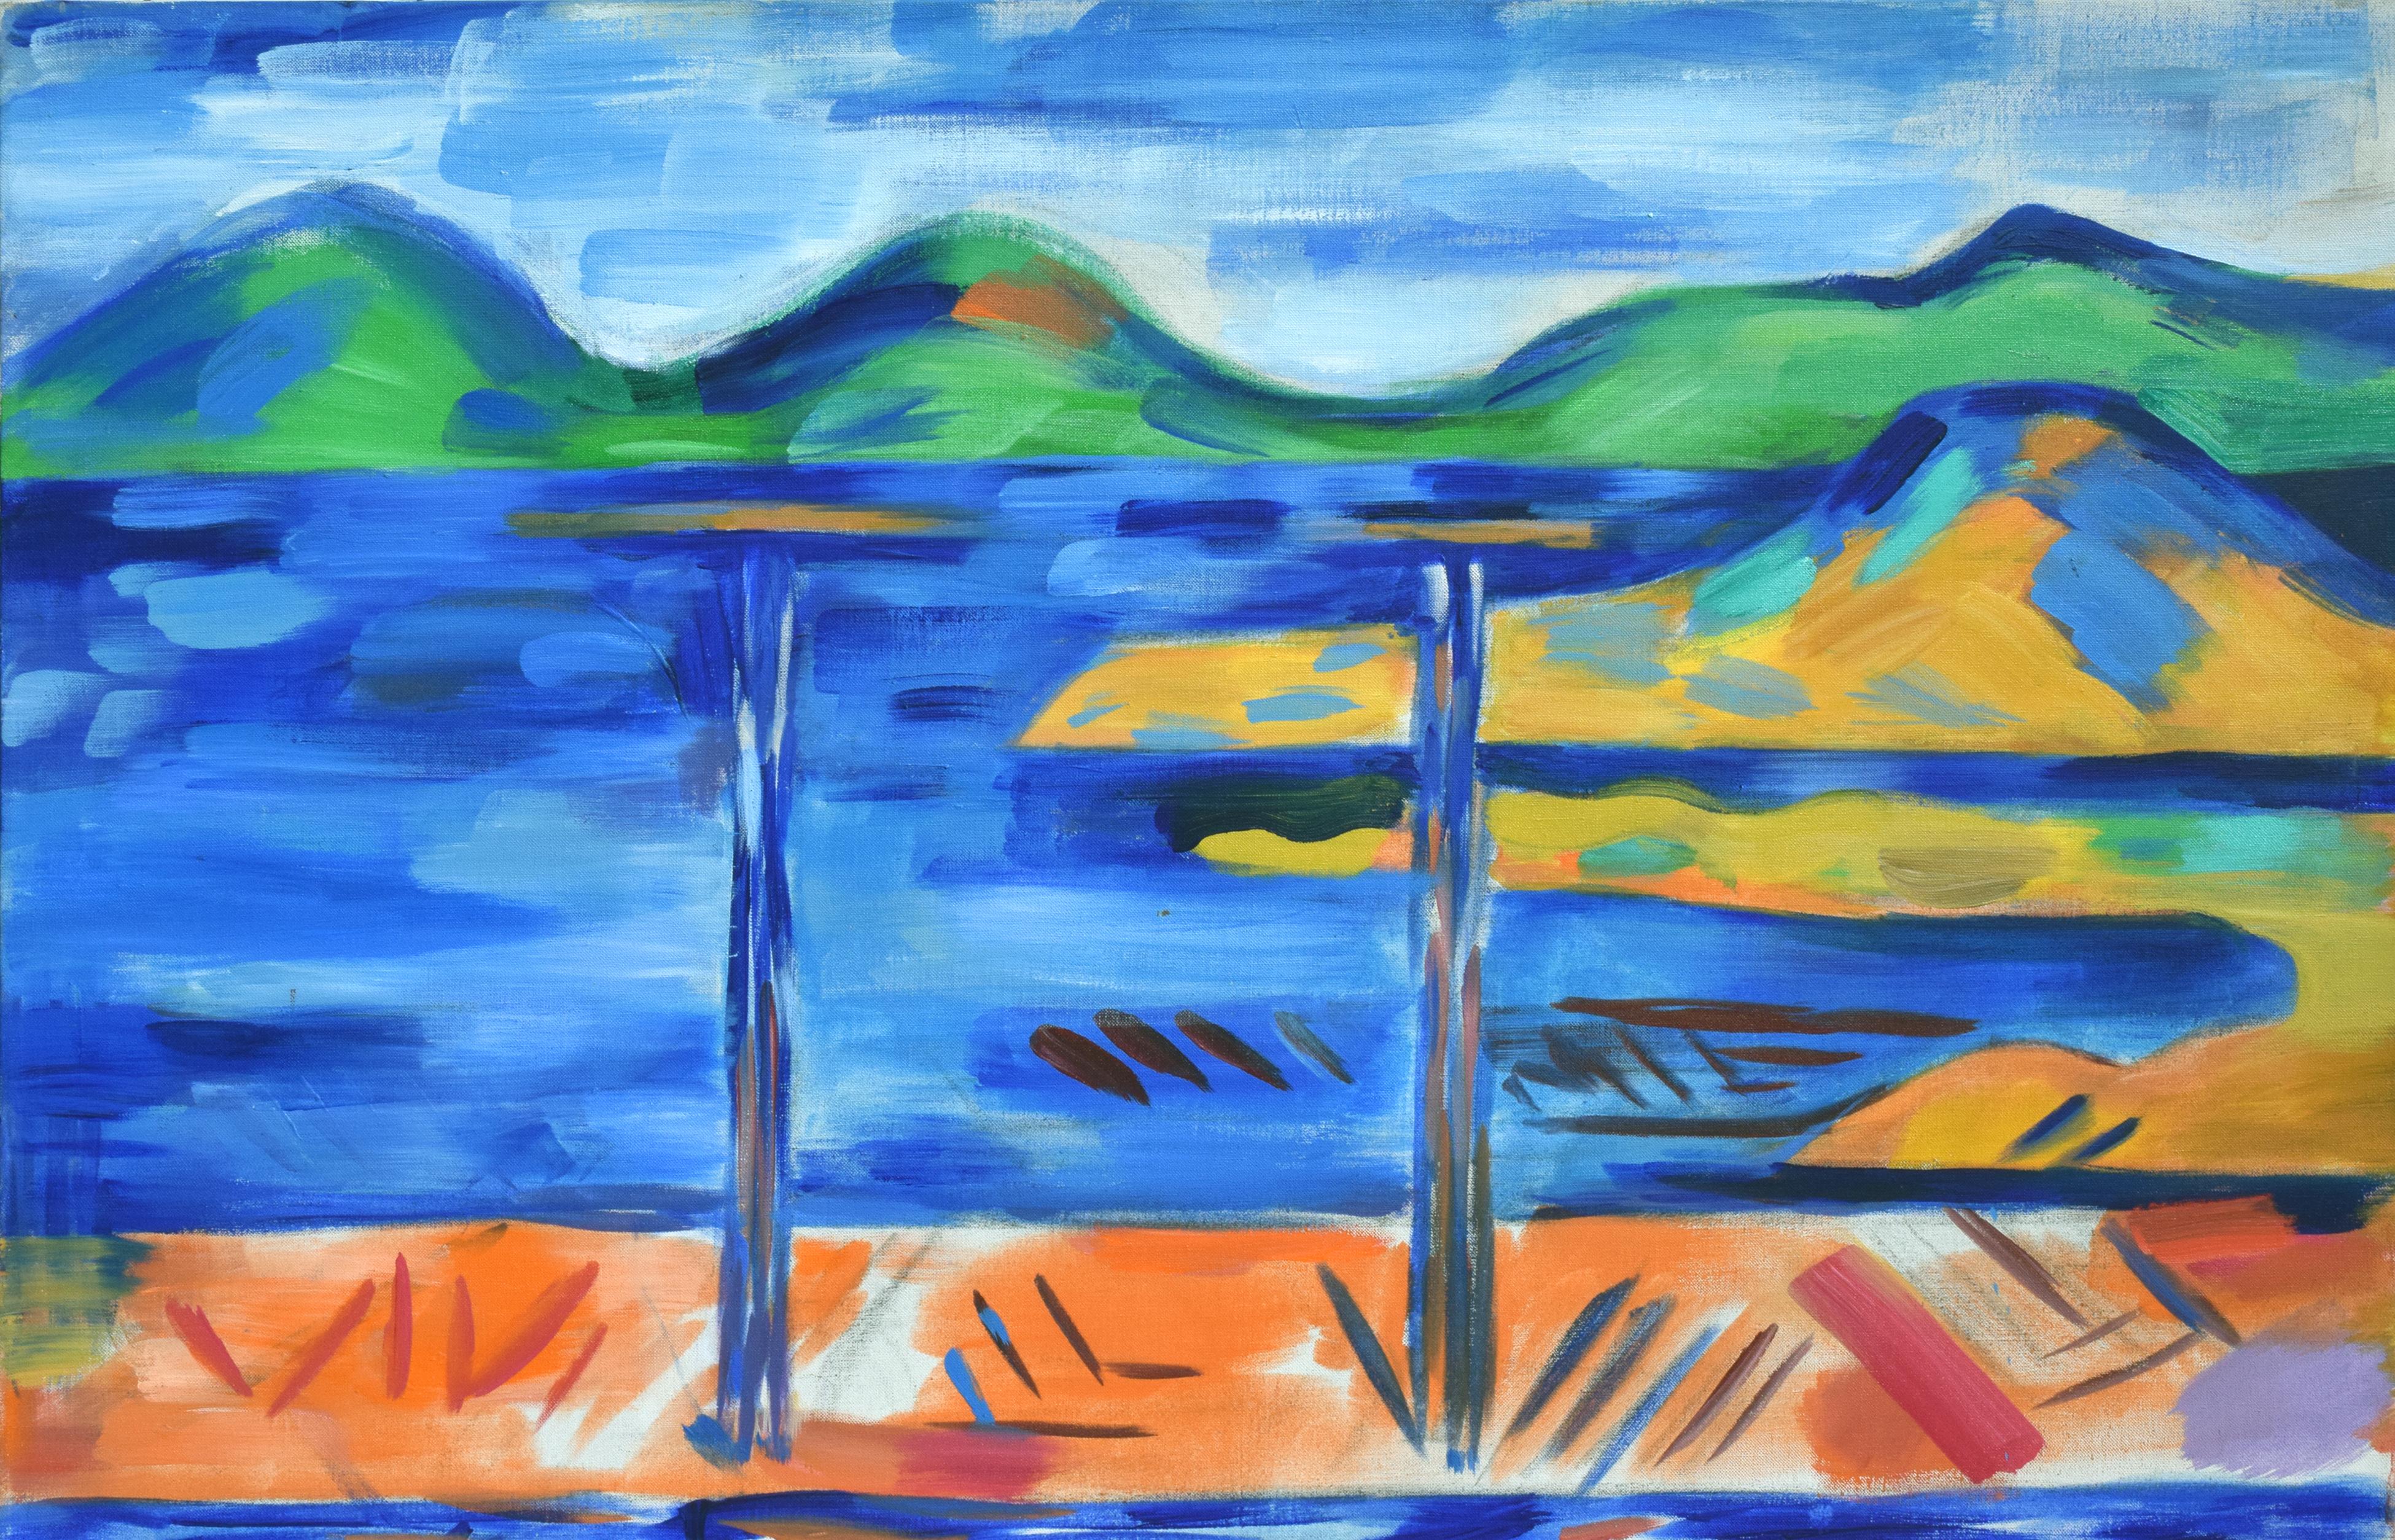 Oakland to Tamalpais Views - Fauvist Abstracted Landscape - Painting by Erle Loran